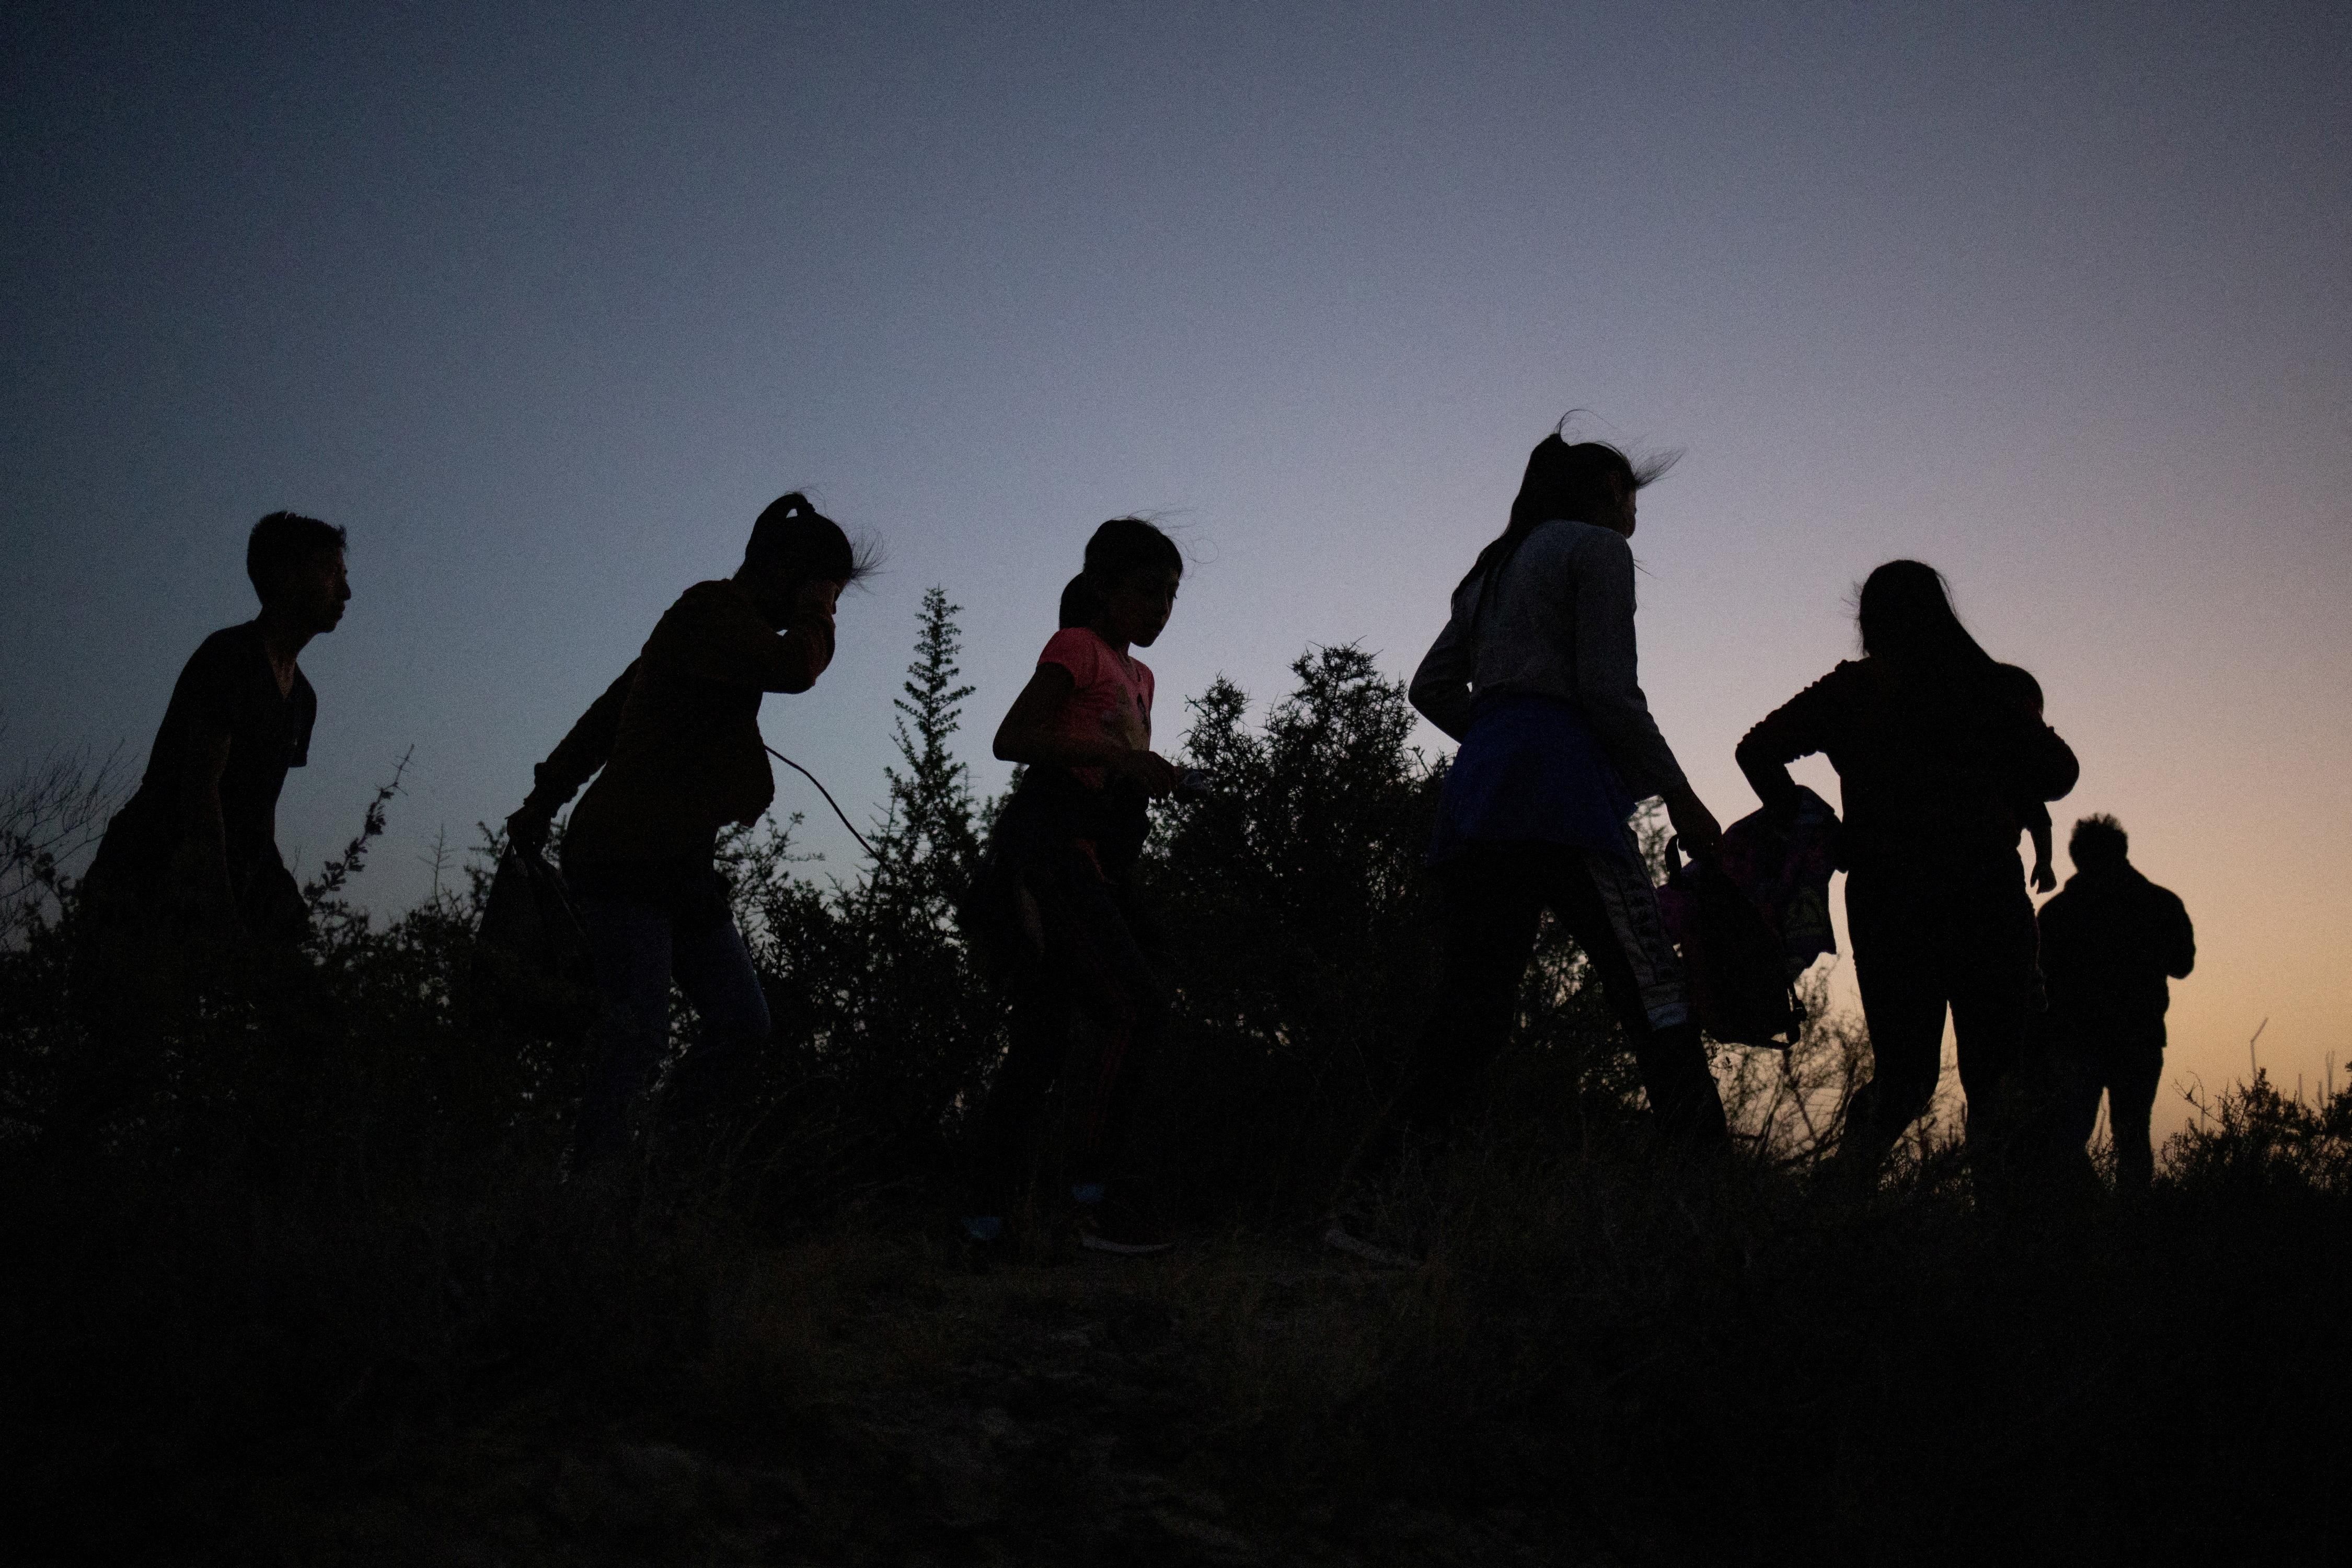 Migrants walk along a dirt trail after crossing the Rio Grande river into the US from Mexico in Roma, Texas.